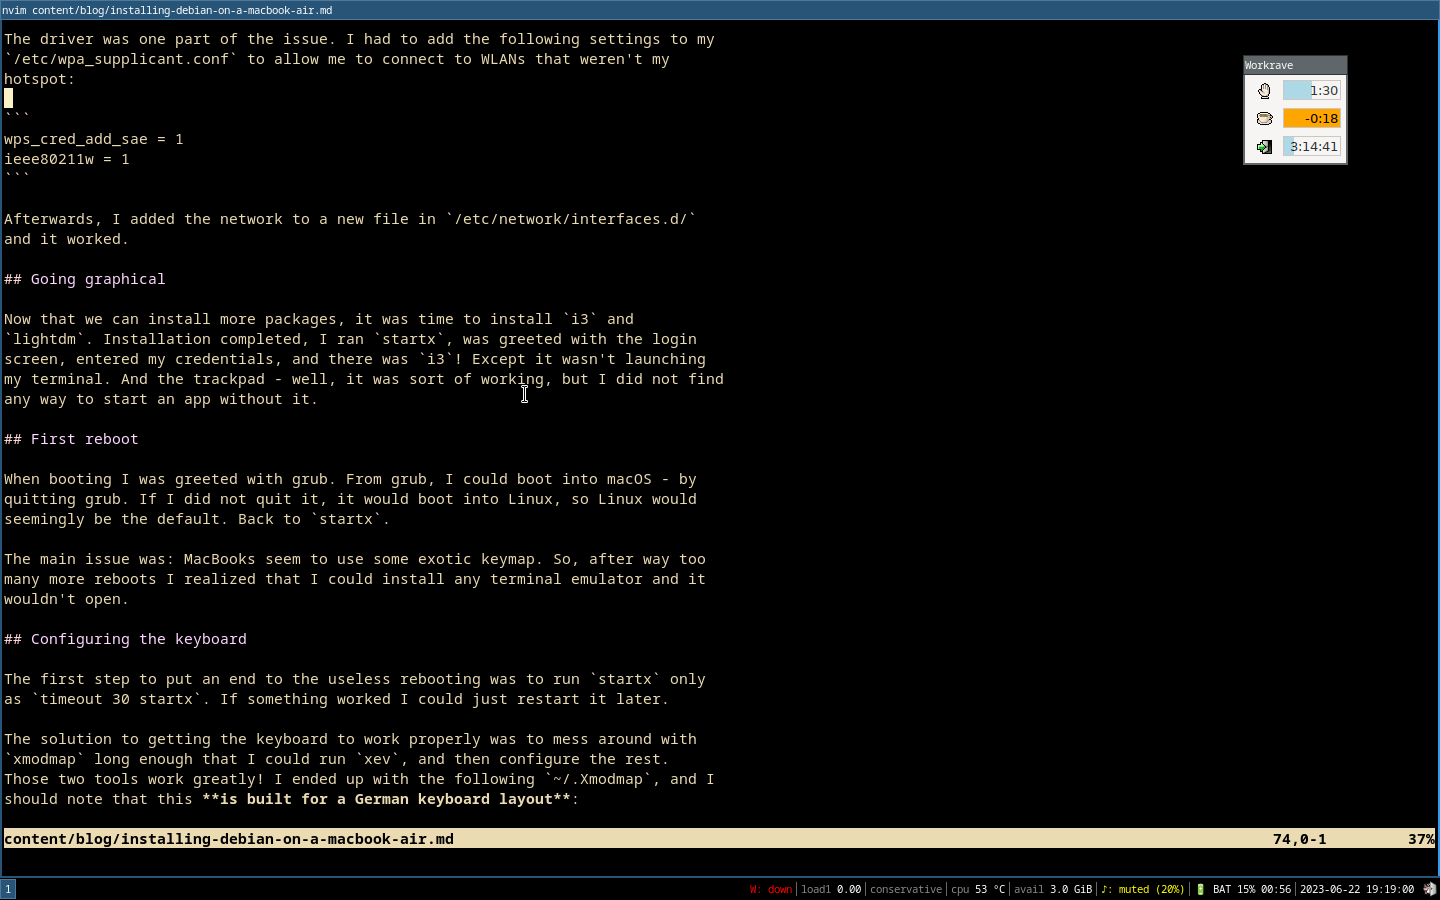 screenshot of the i3 window manager running vim editing this article, withi3bar in the bottom